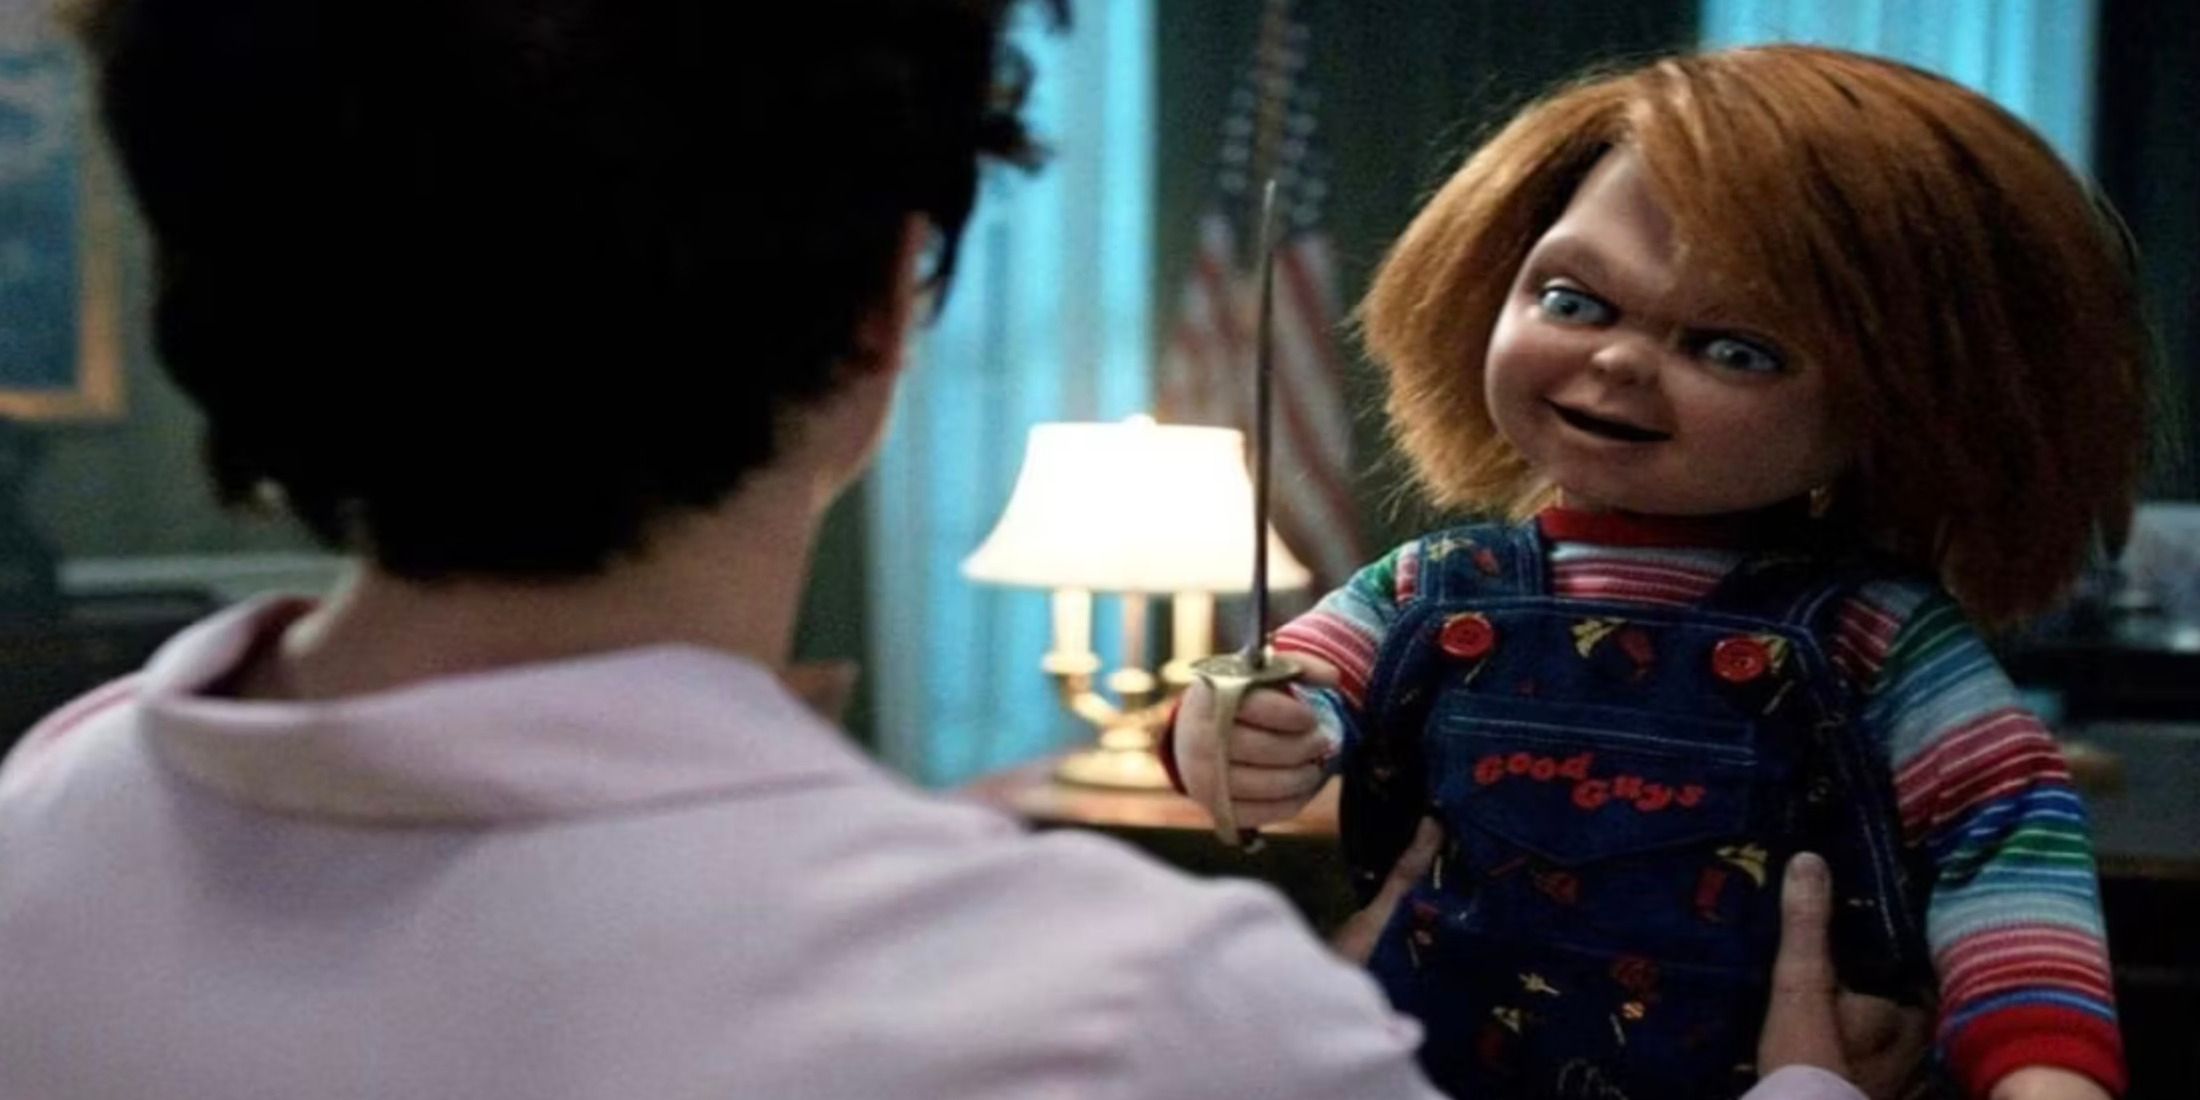 Actors Brad and Fiona Dourif Are Always Ready For More Chucky